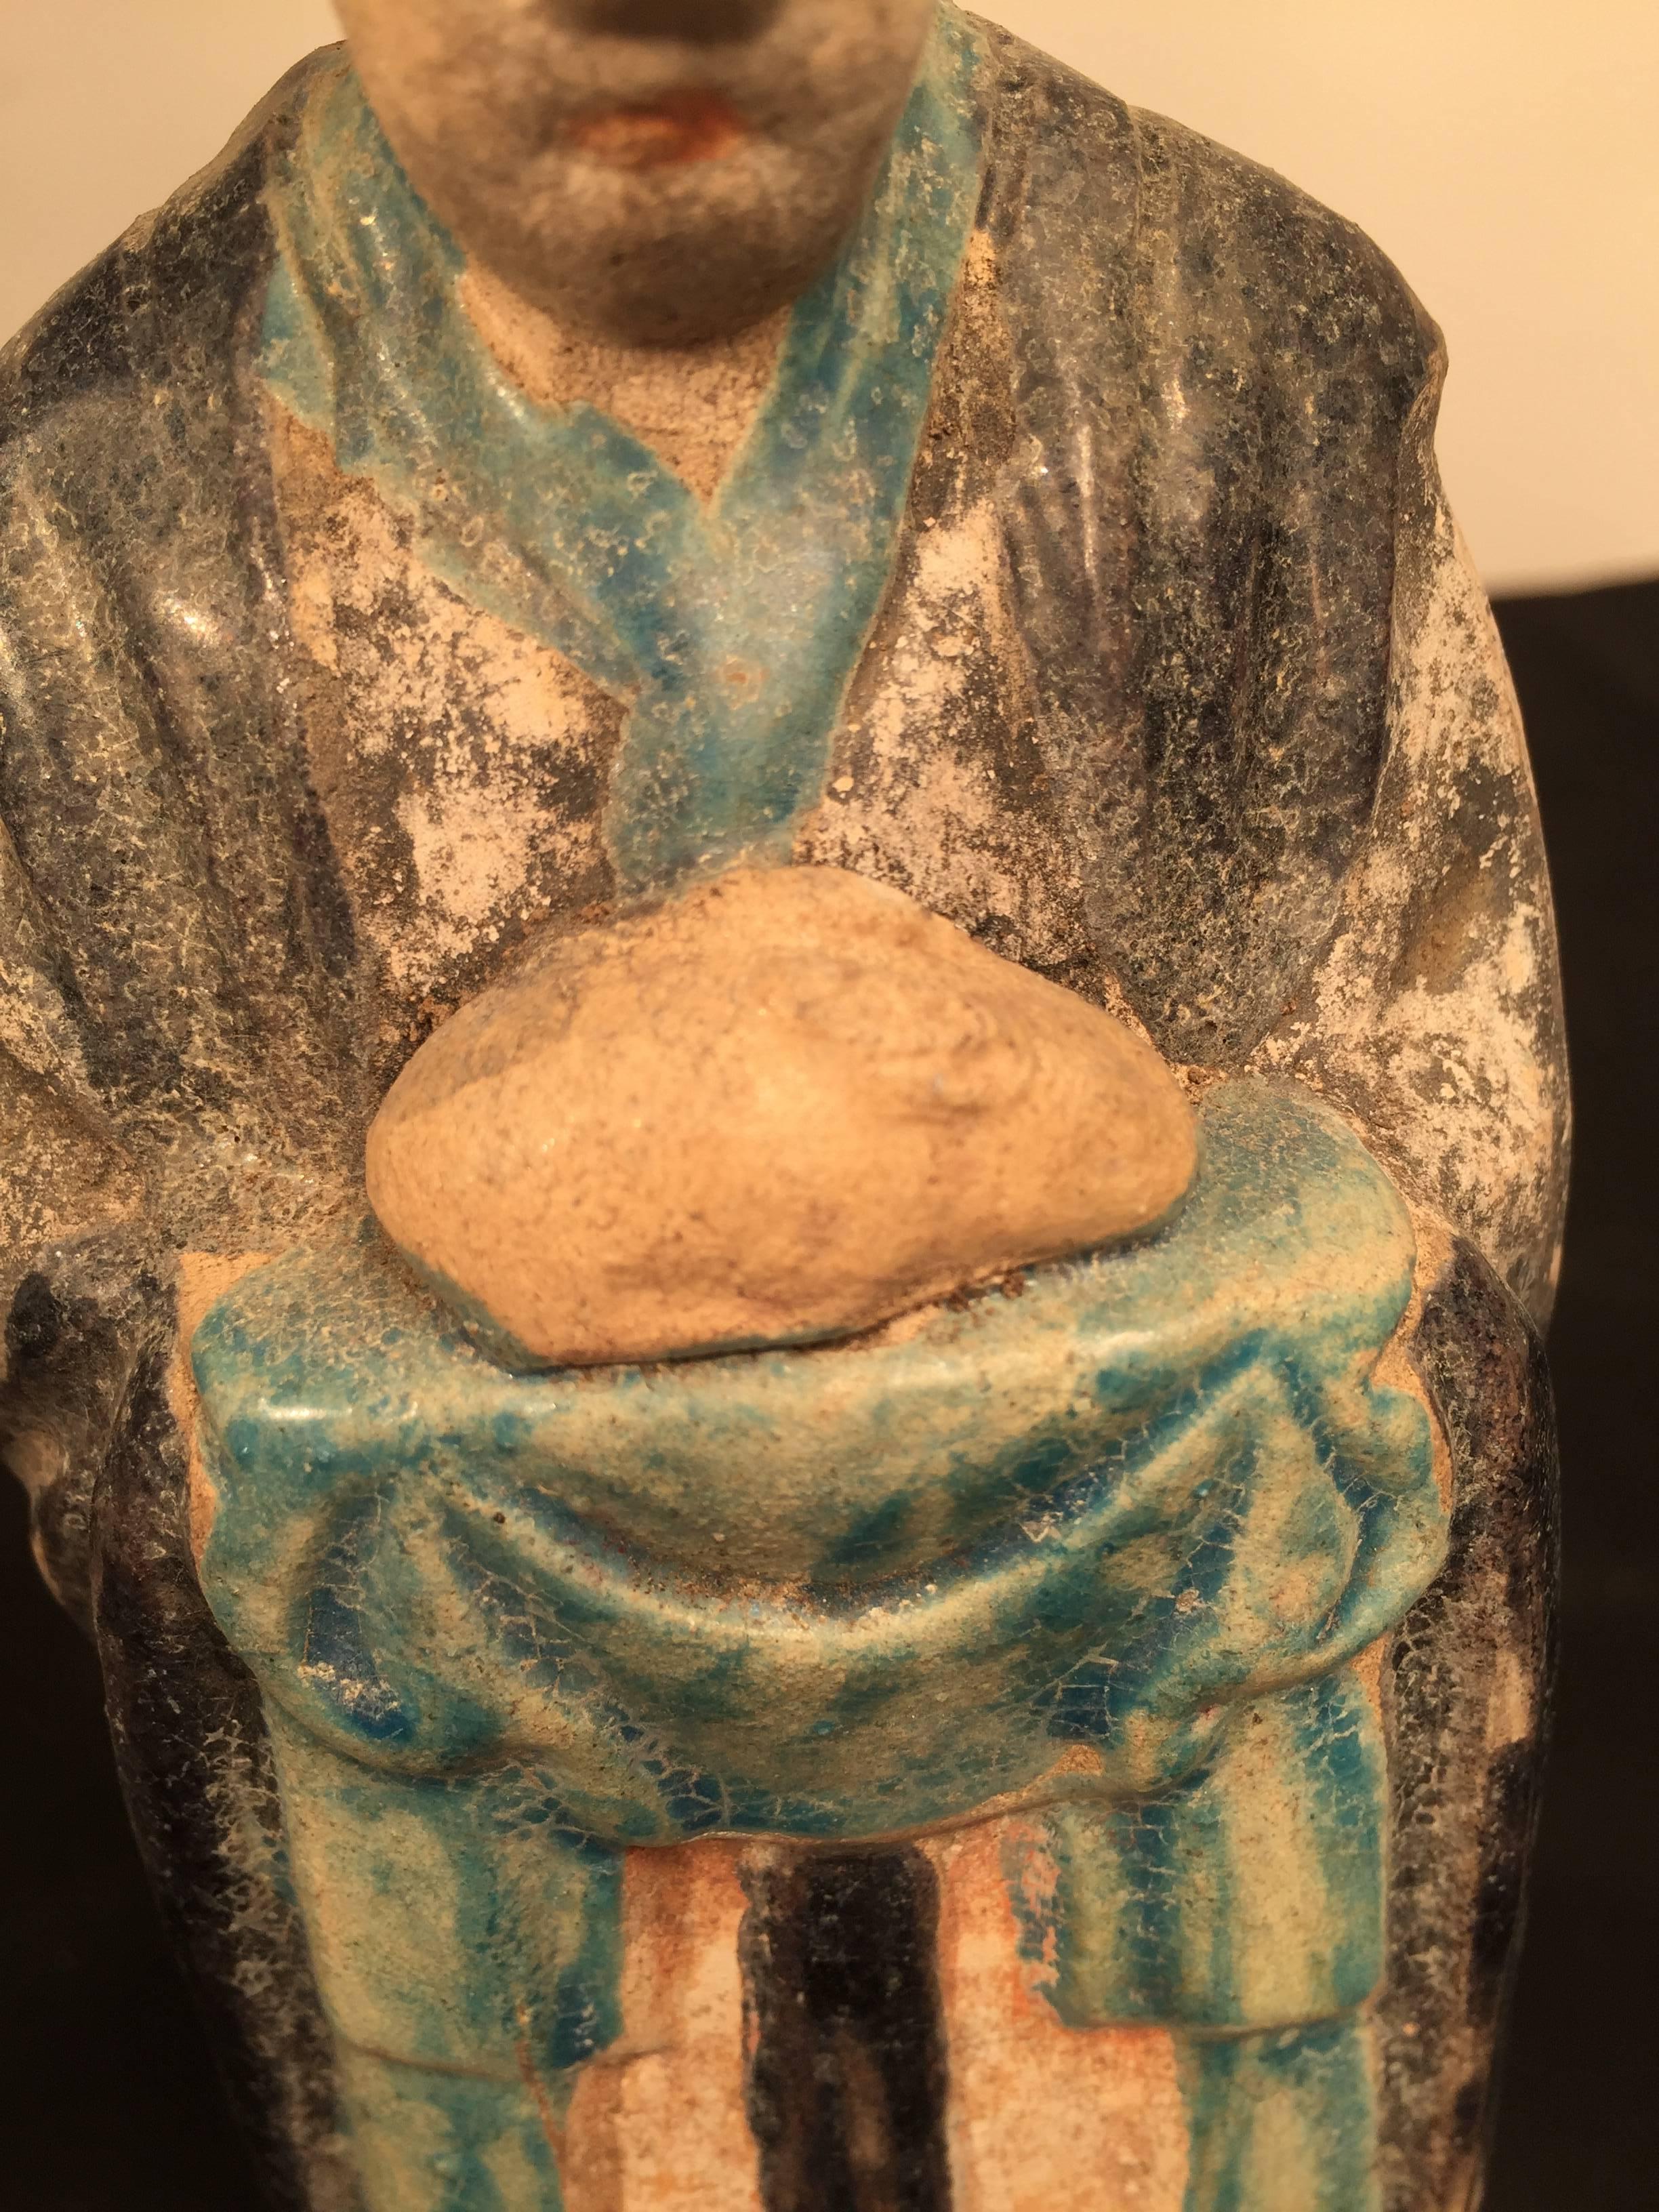 Glazed Important Ancient Chinese Zodiac Figure Holding a Rabbit, Ming Dynasty 1368-1644